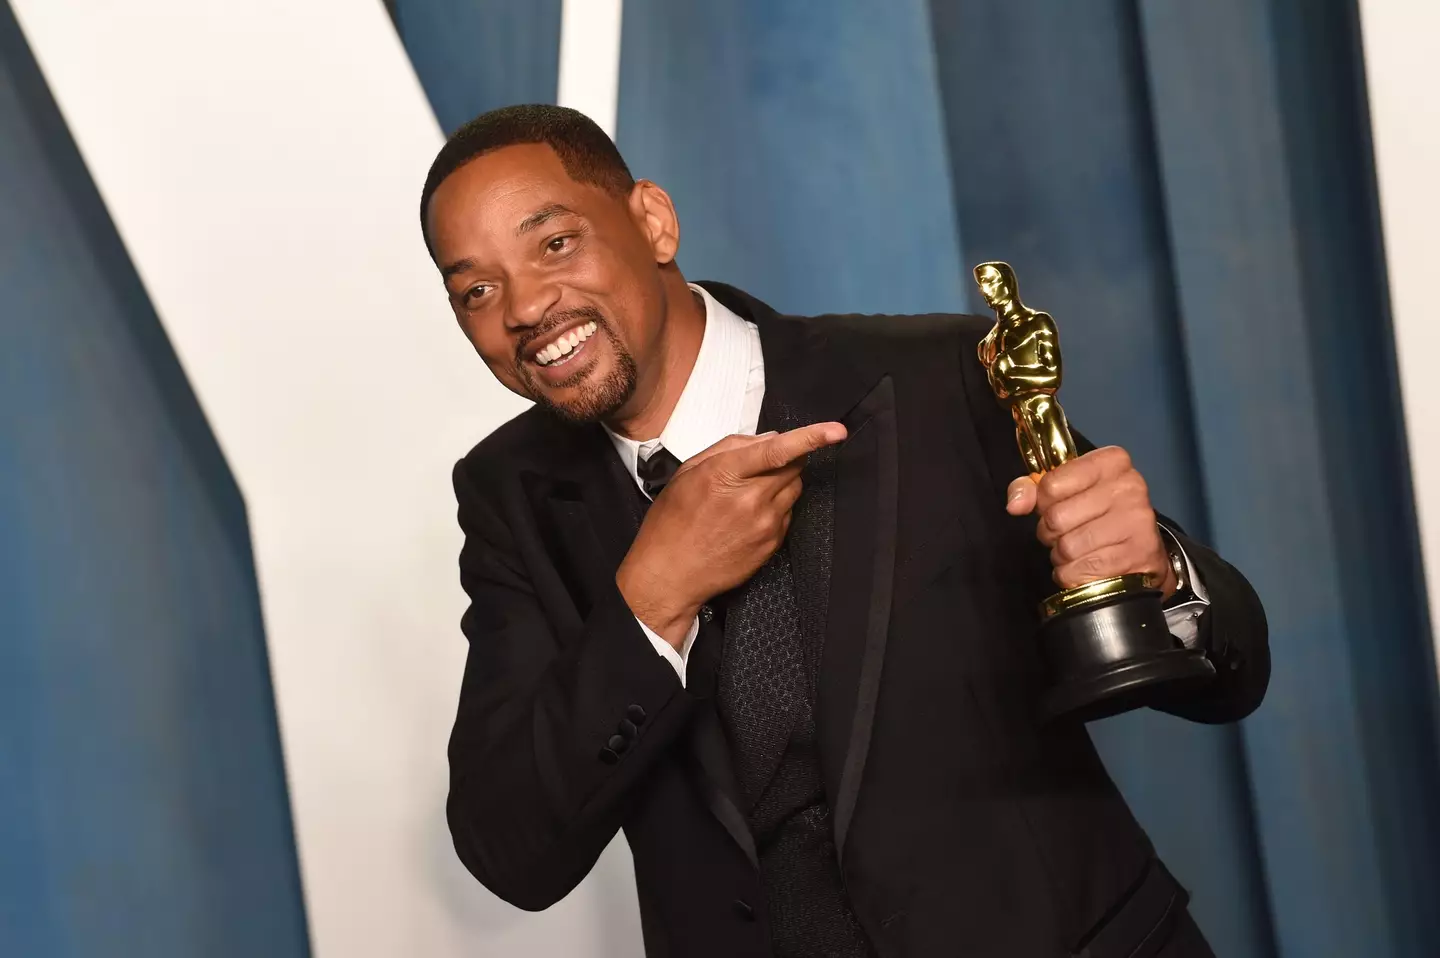 Will Smith got up on stage to hit comedian Chris Rock, prior to winning the award for Best Leading Actor. (